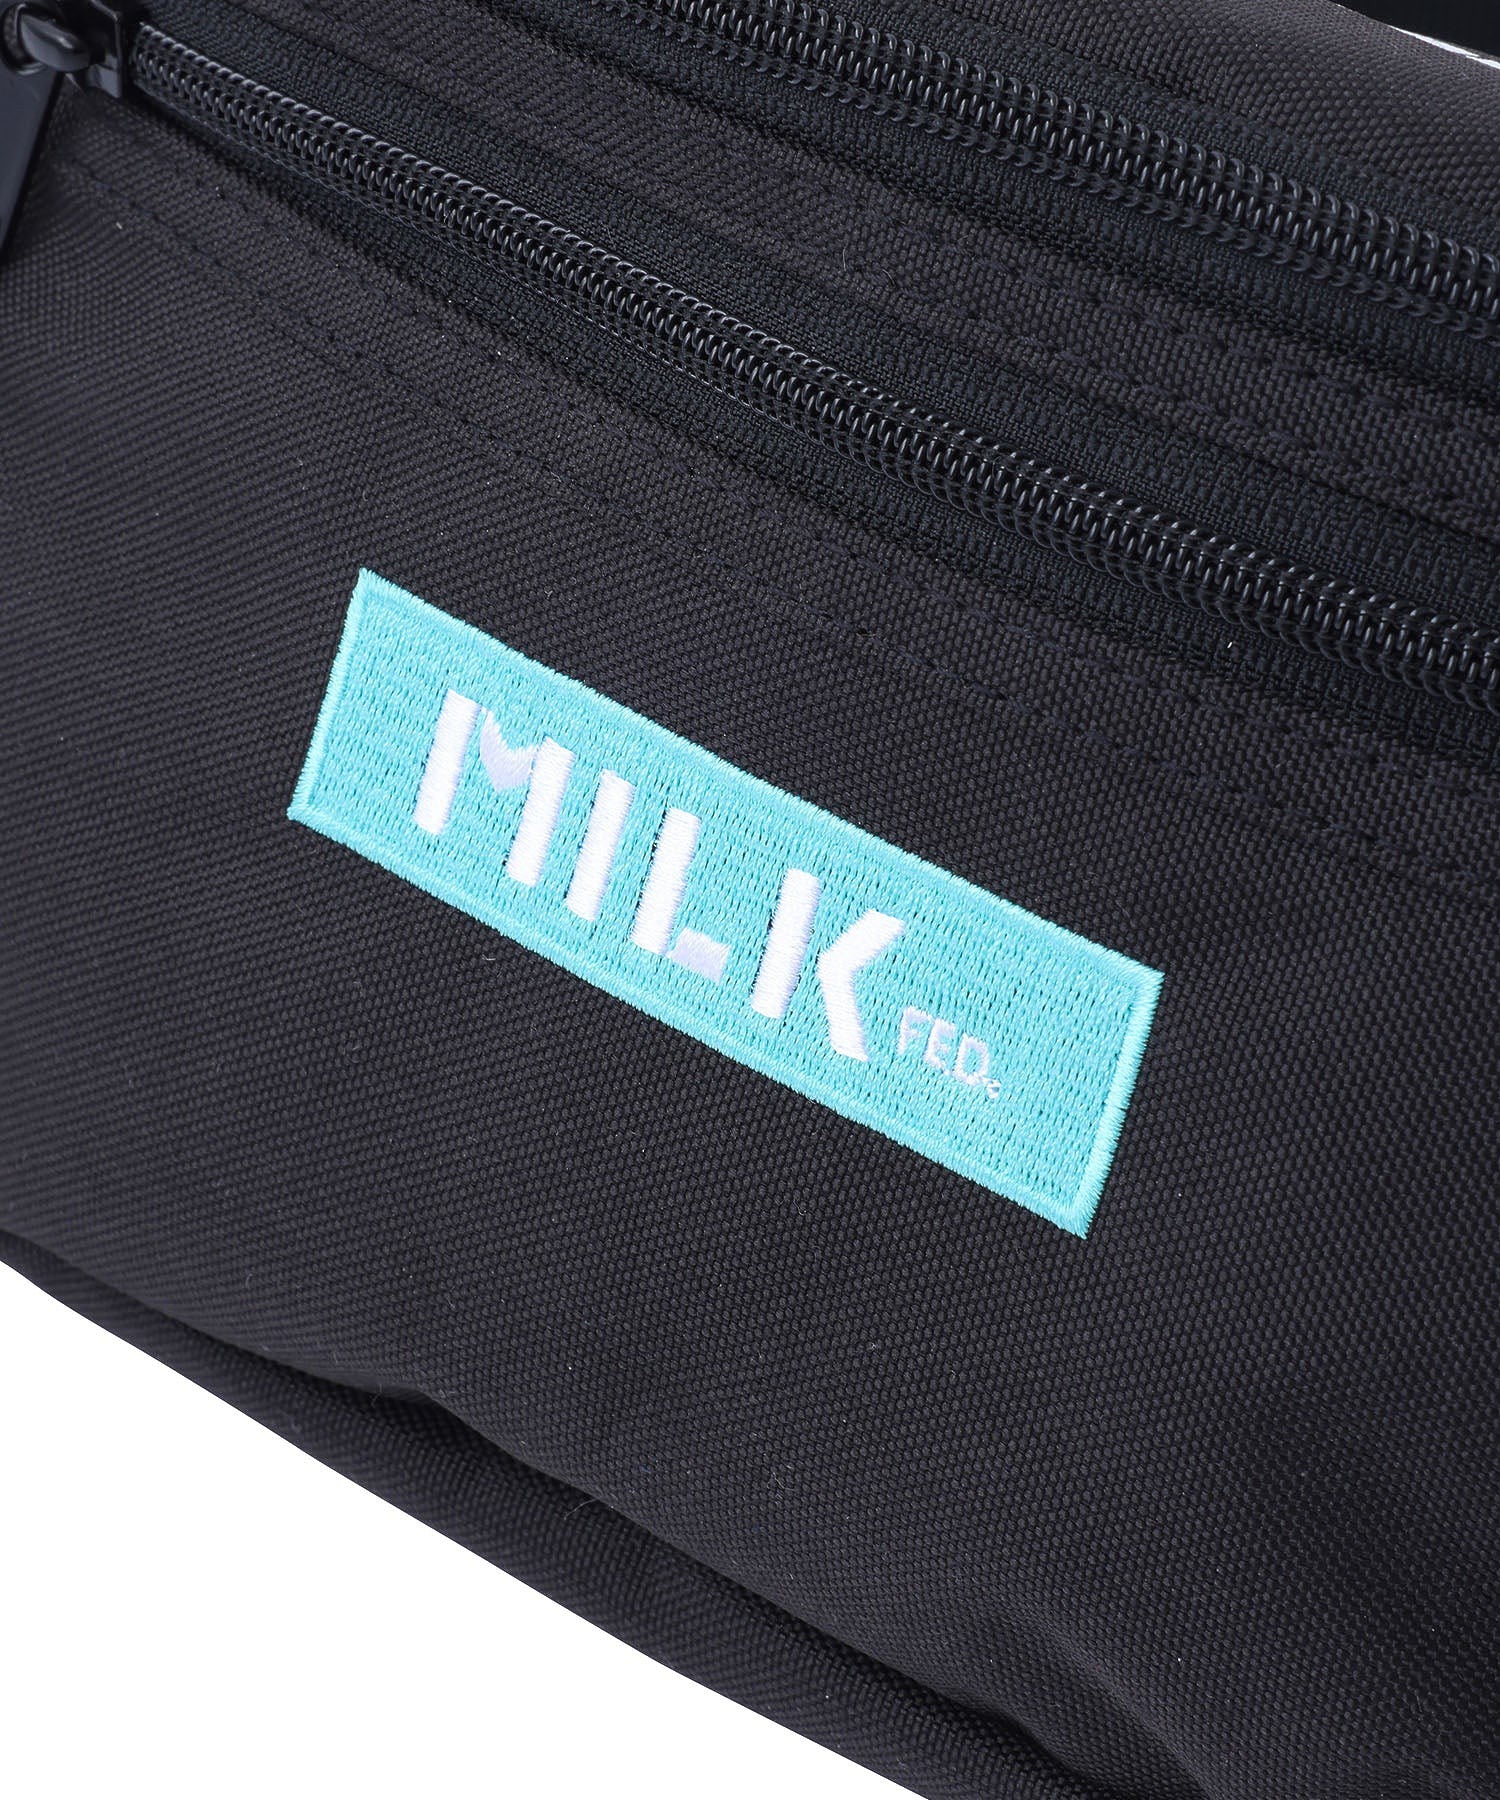 TOP LOGO FANNY PACK LIMITED COLOR MILKFED.